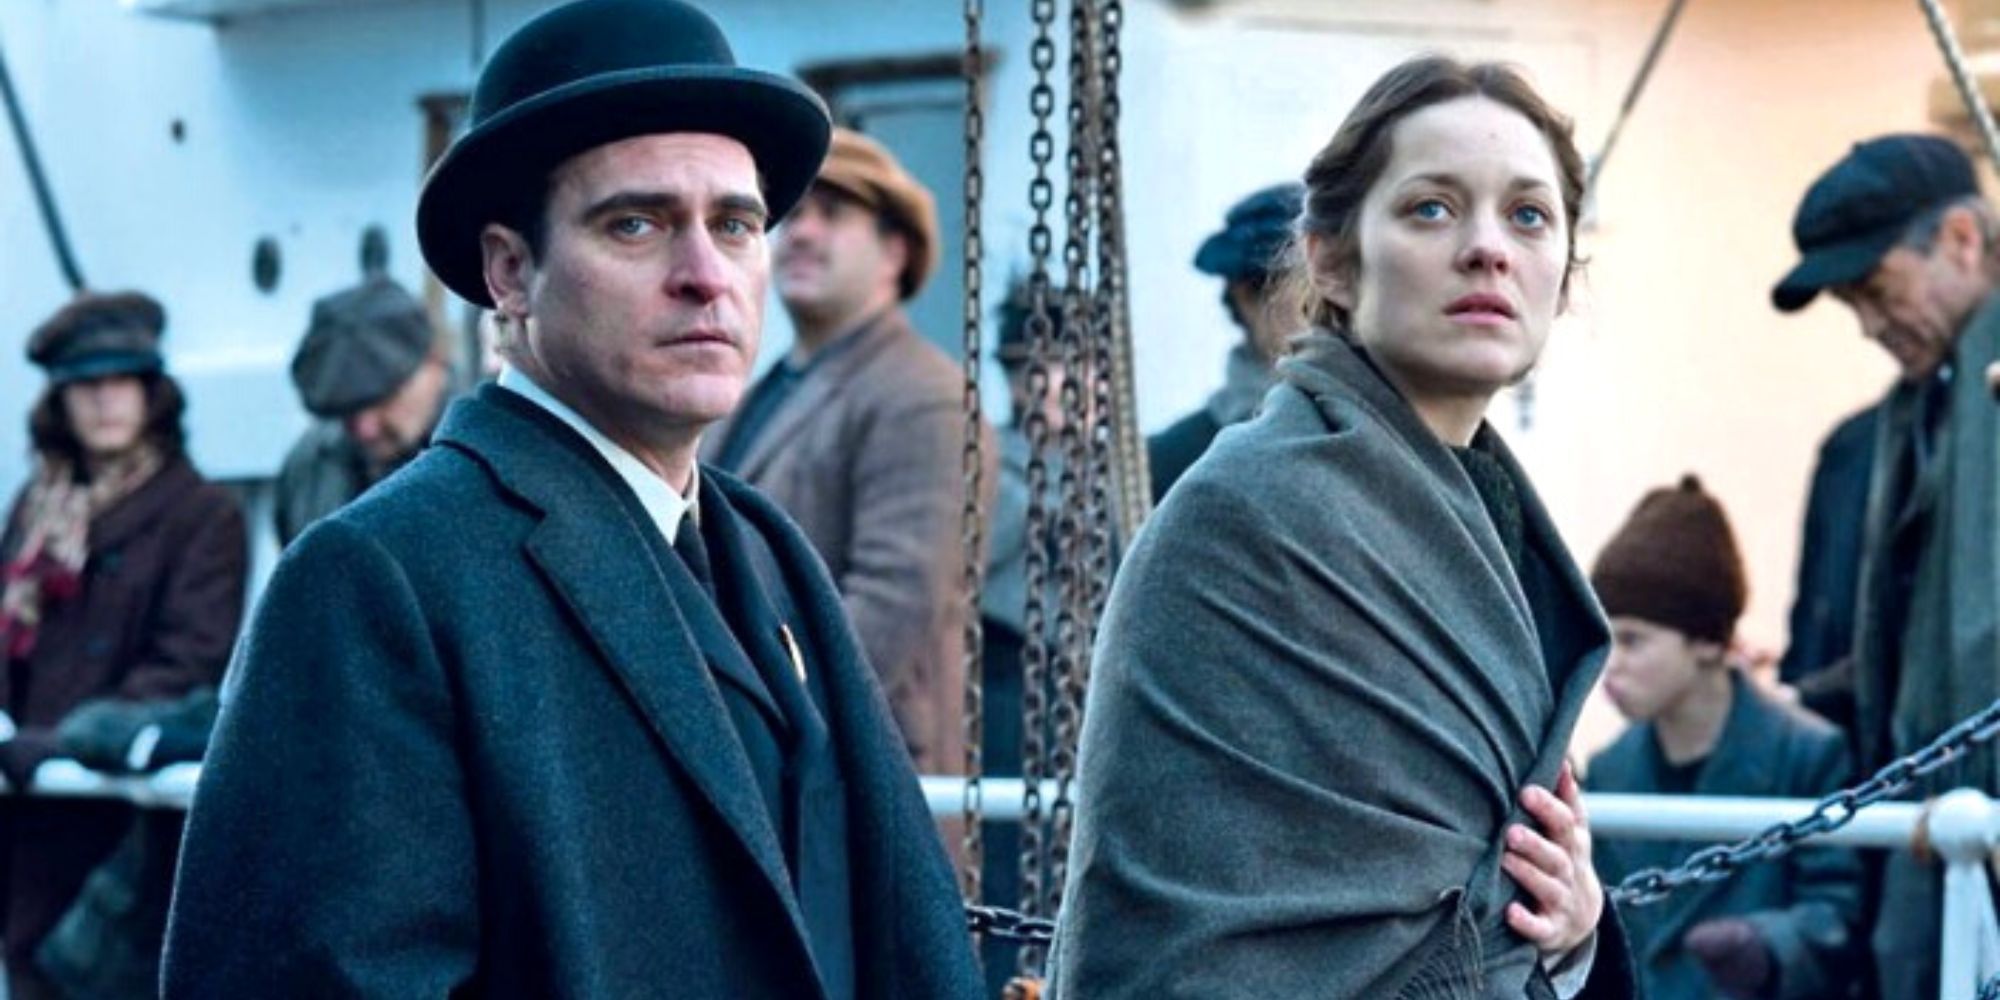 Joaquin Phoenix next to Marion Cotillard on a full ship in the movie 